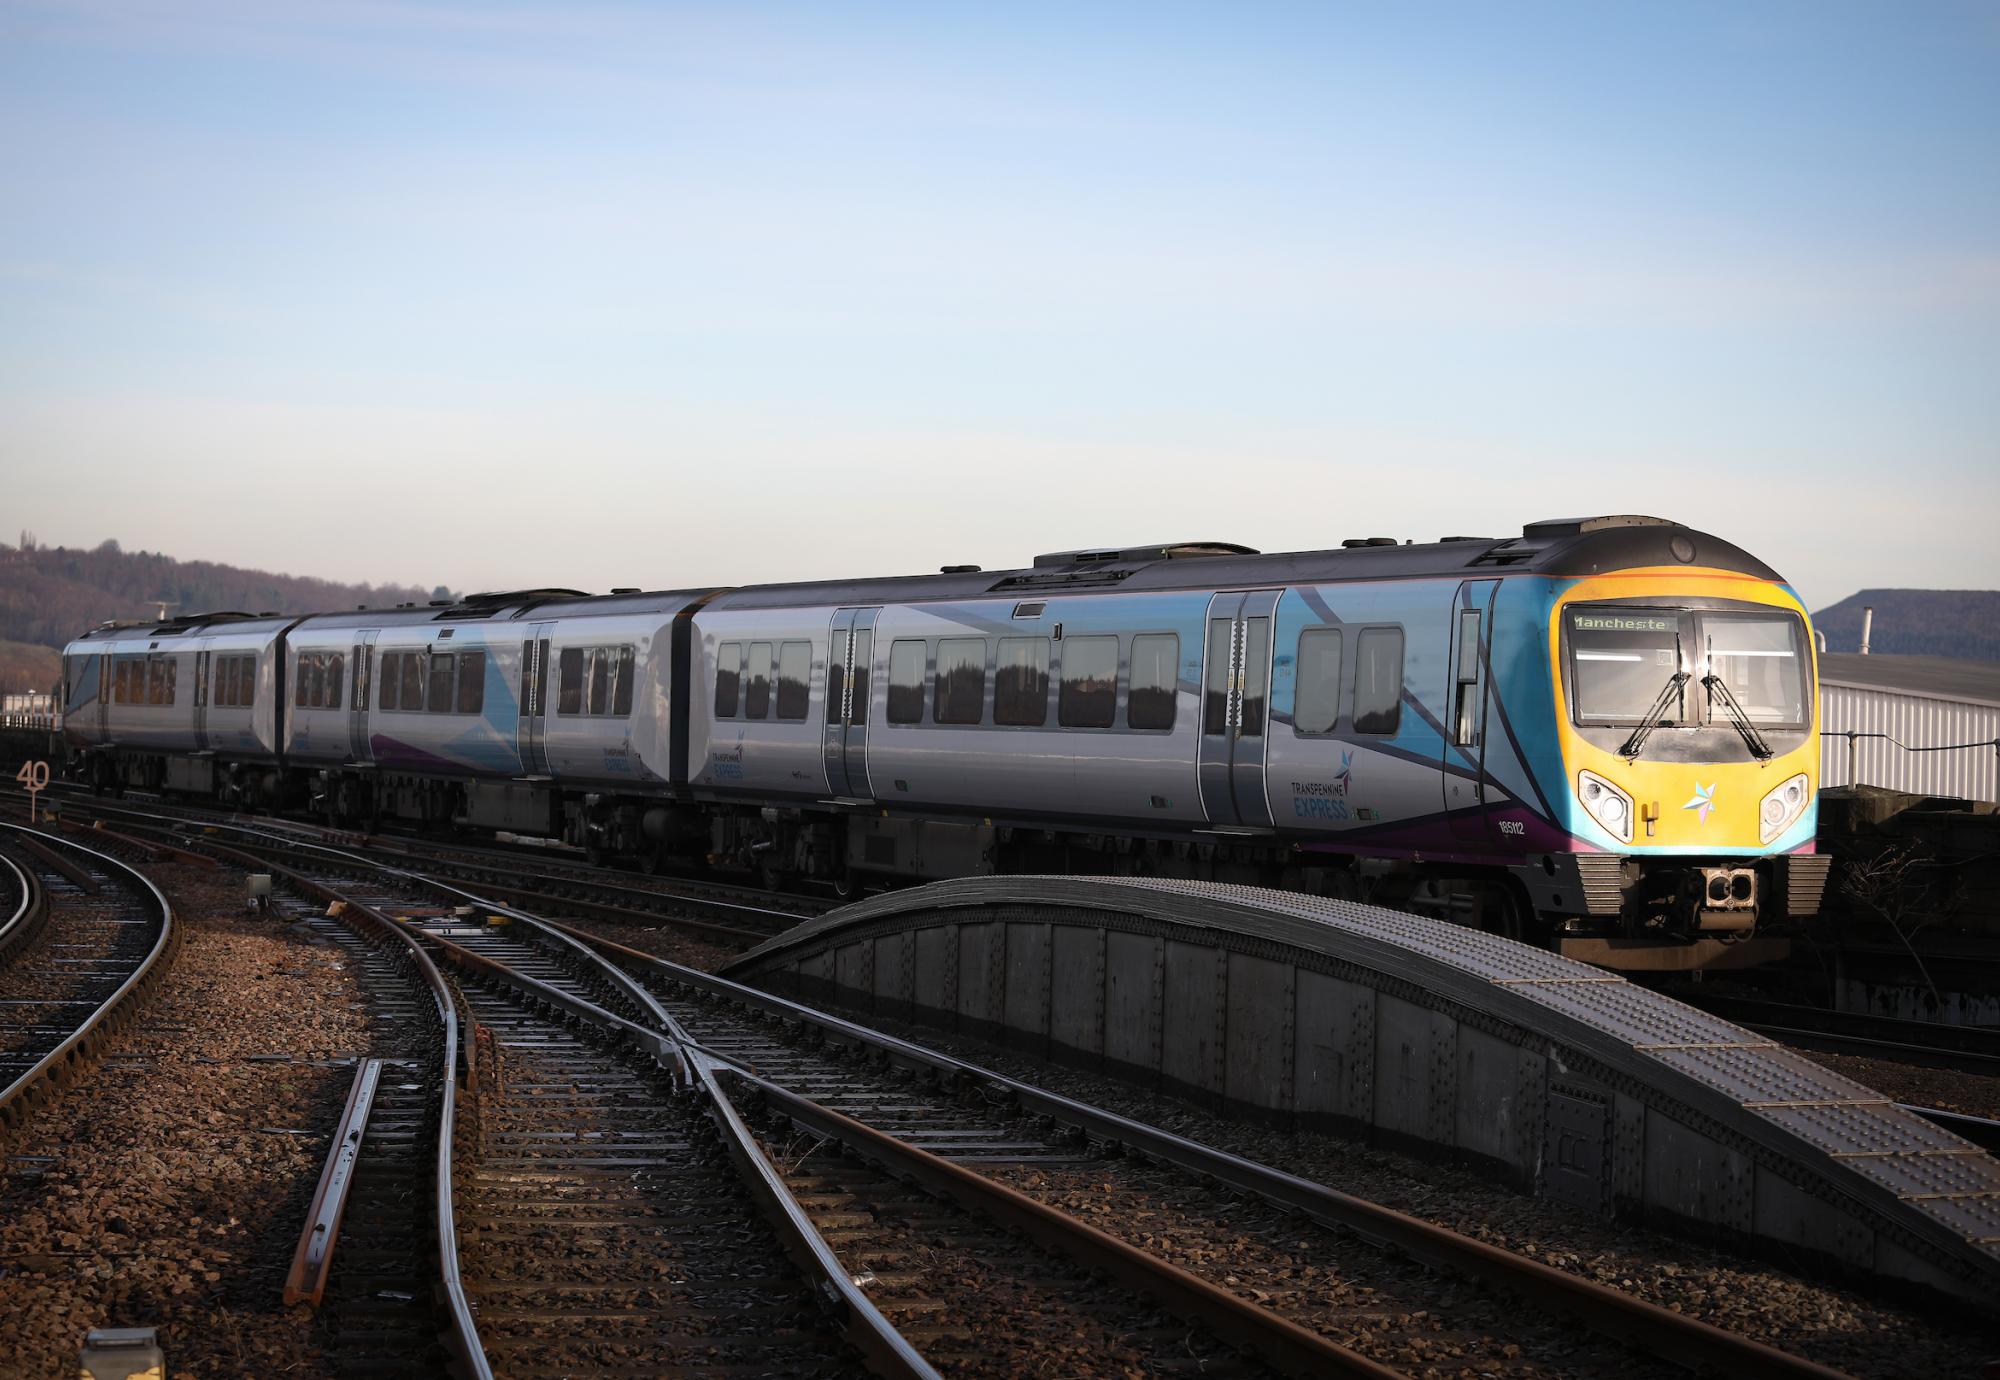 Transpennine Trains award new £455 million maintenance contract to Siemens Mobility